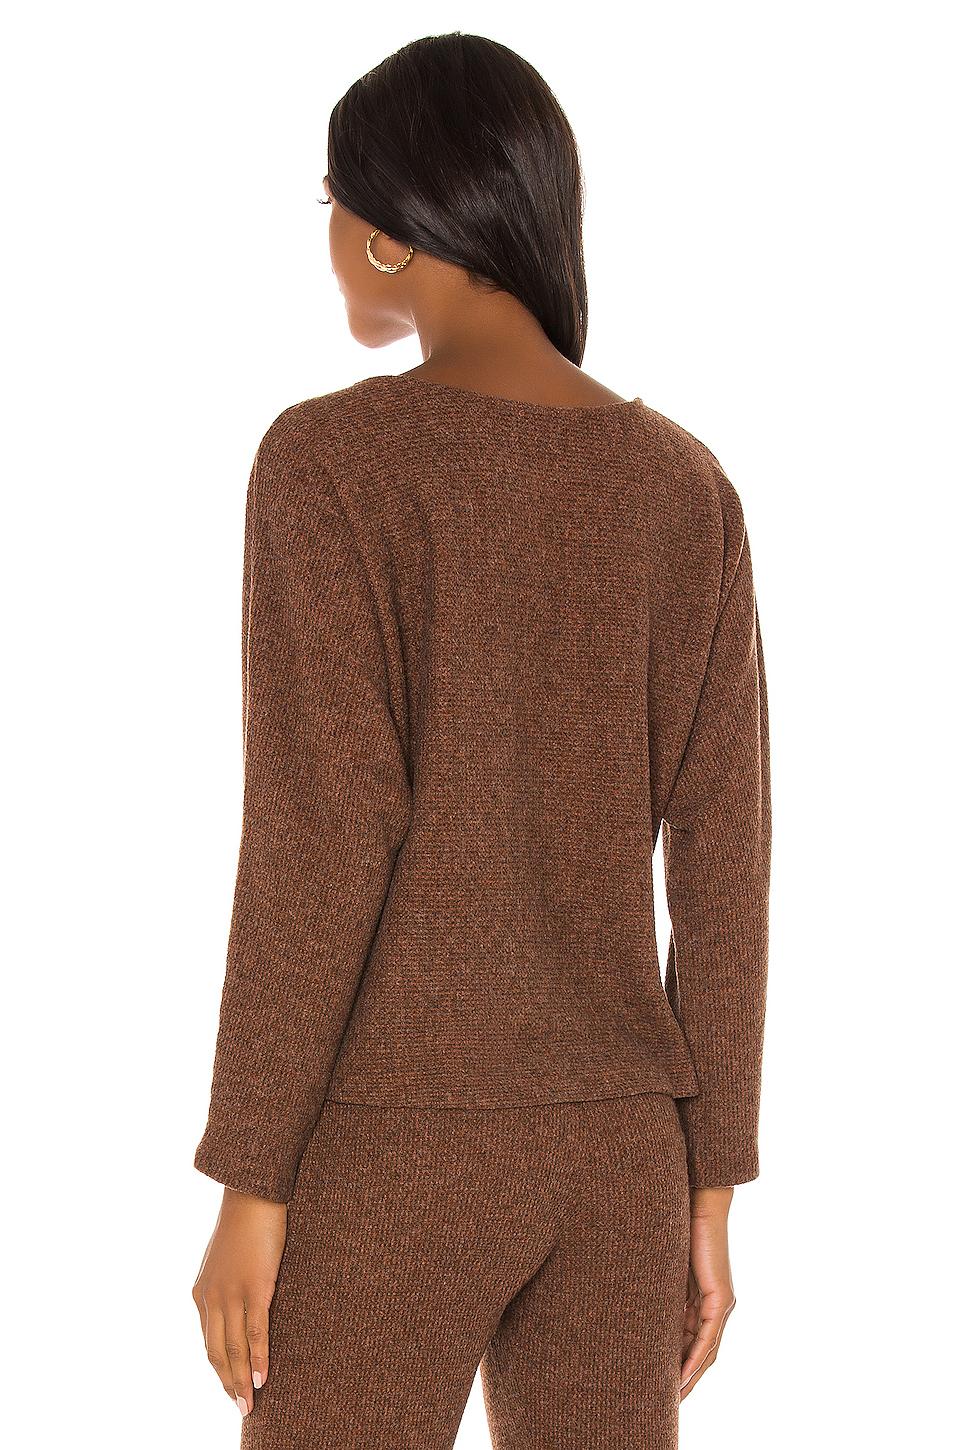 Monrow Thermal Open Neck Tee in Caramel (Brown) - Lyst